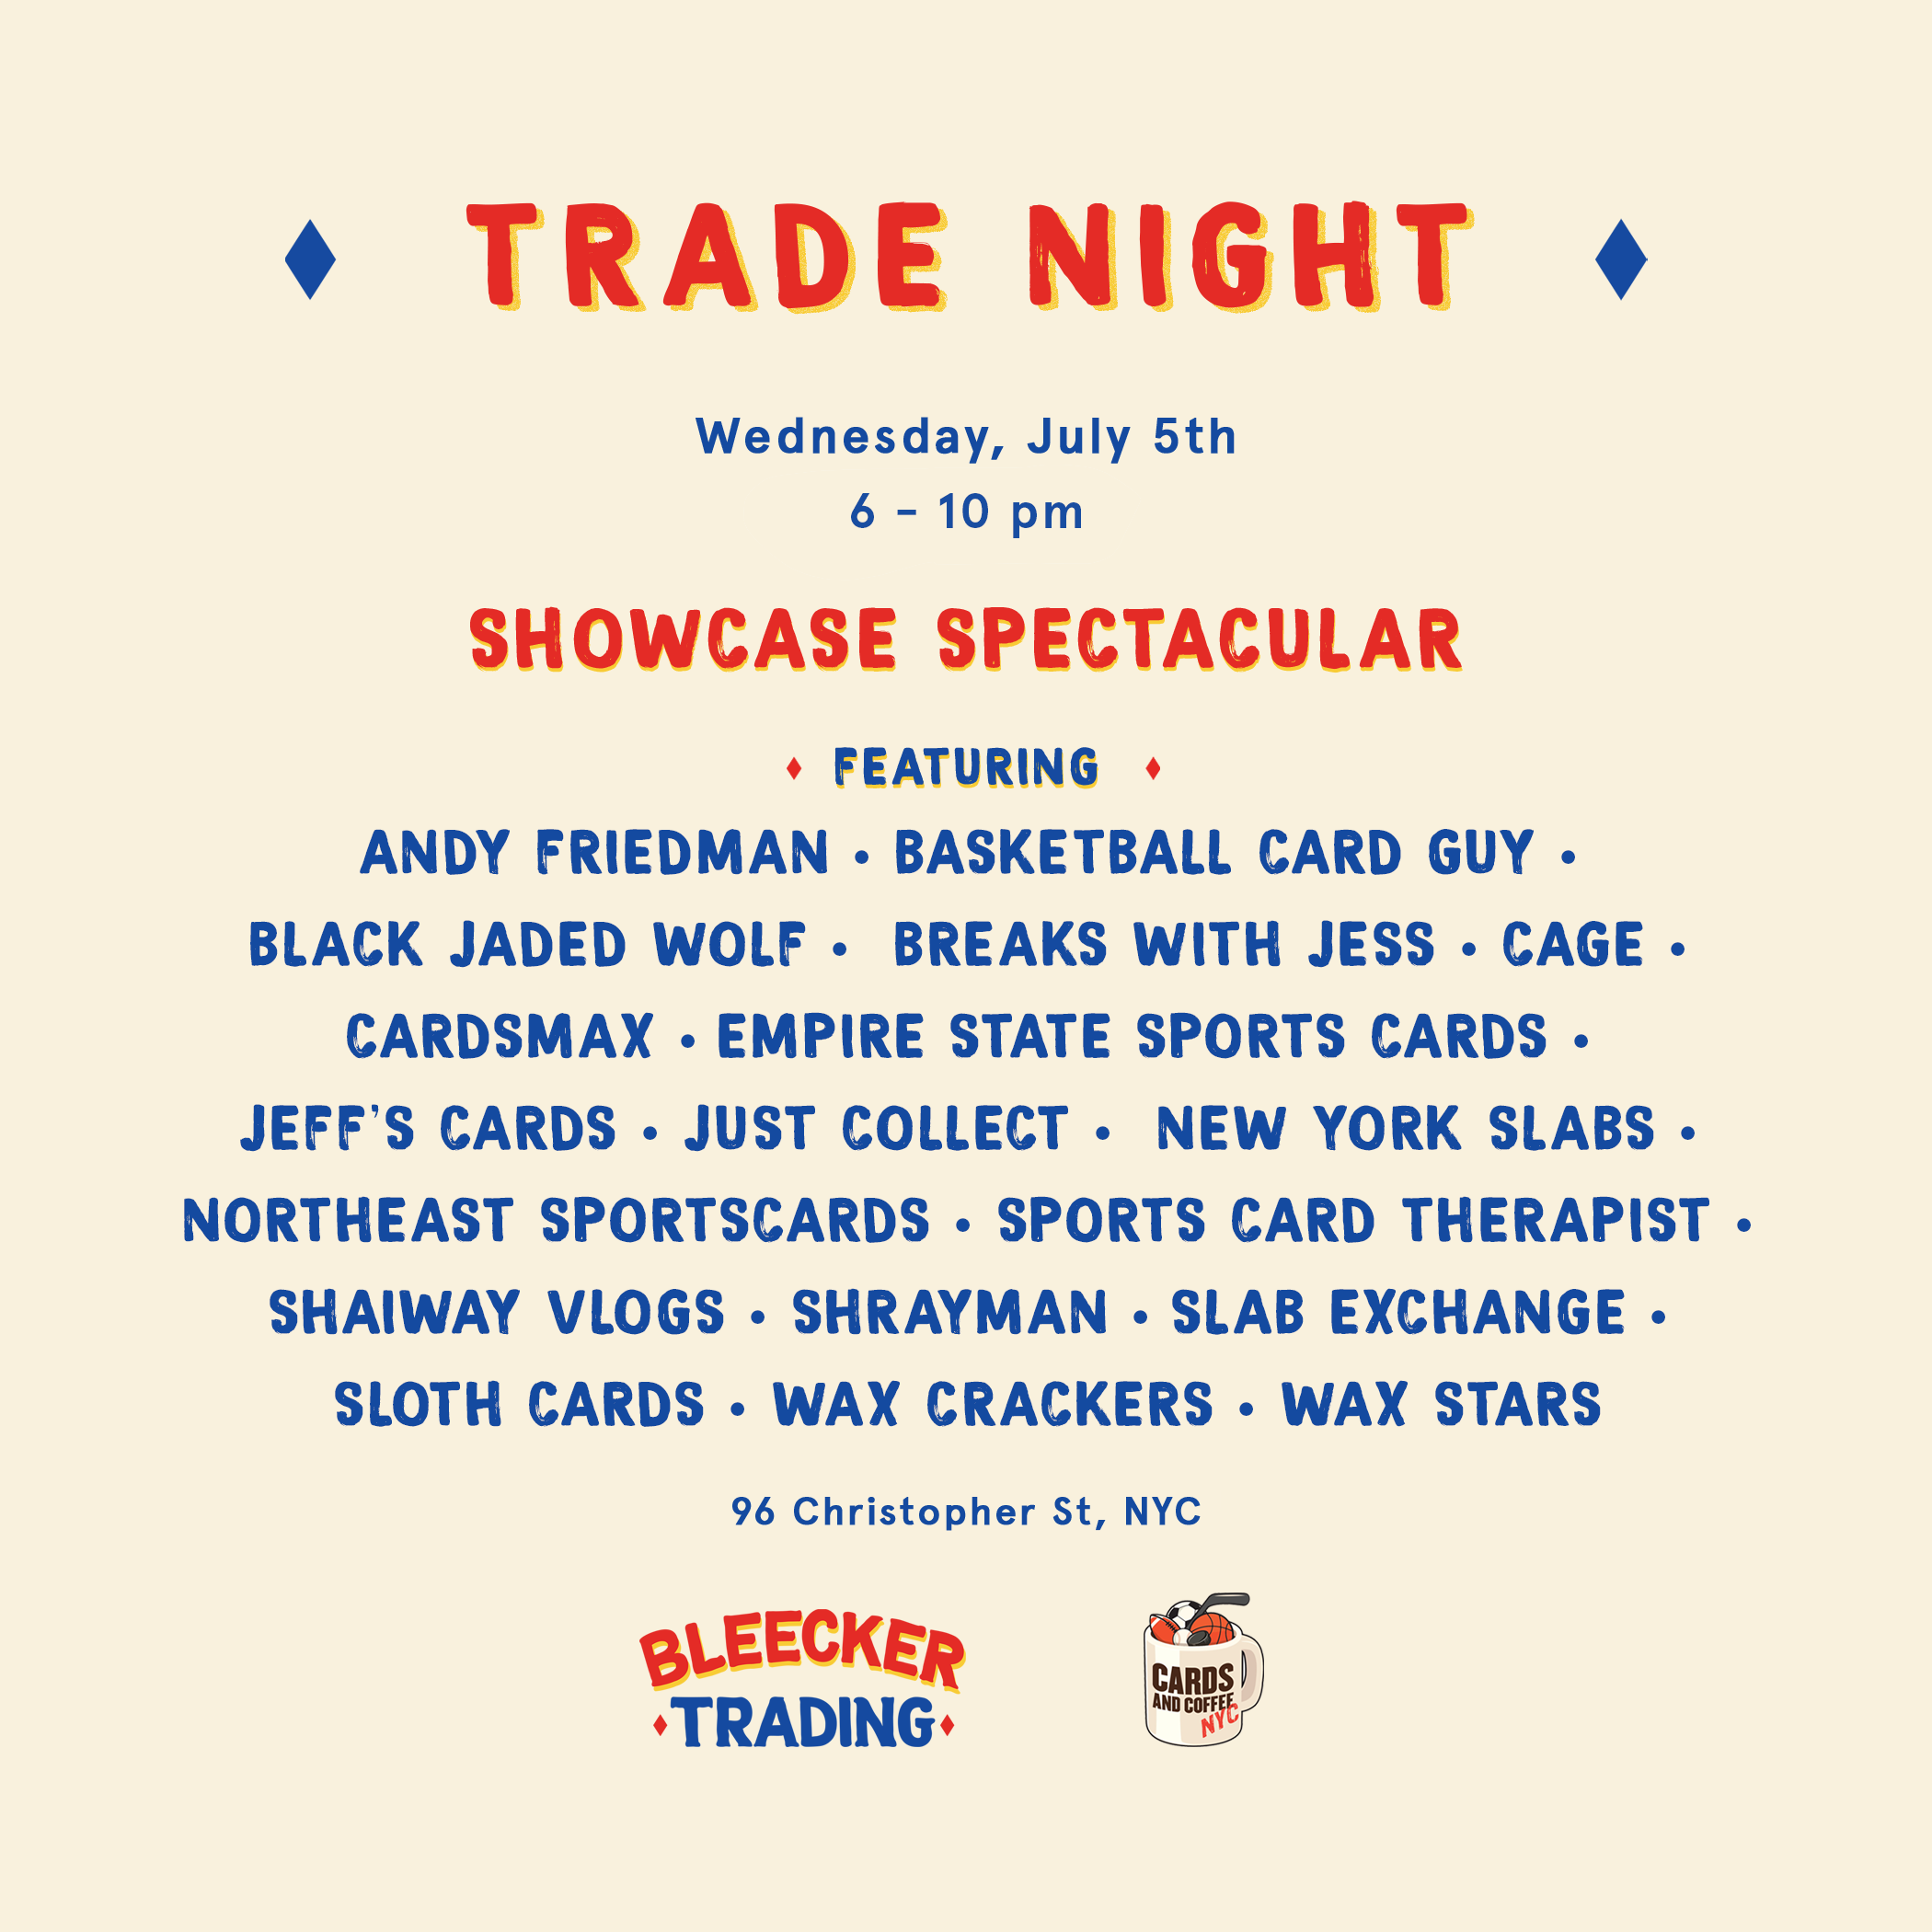 July 5th Trade Night: The Bleecker Showcase Spectacular